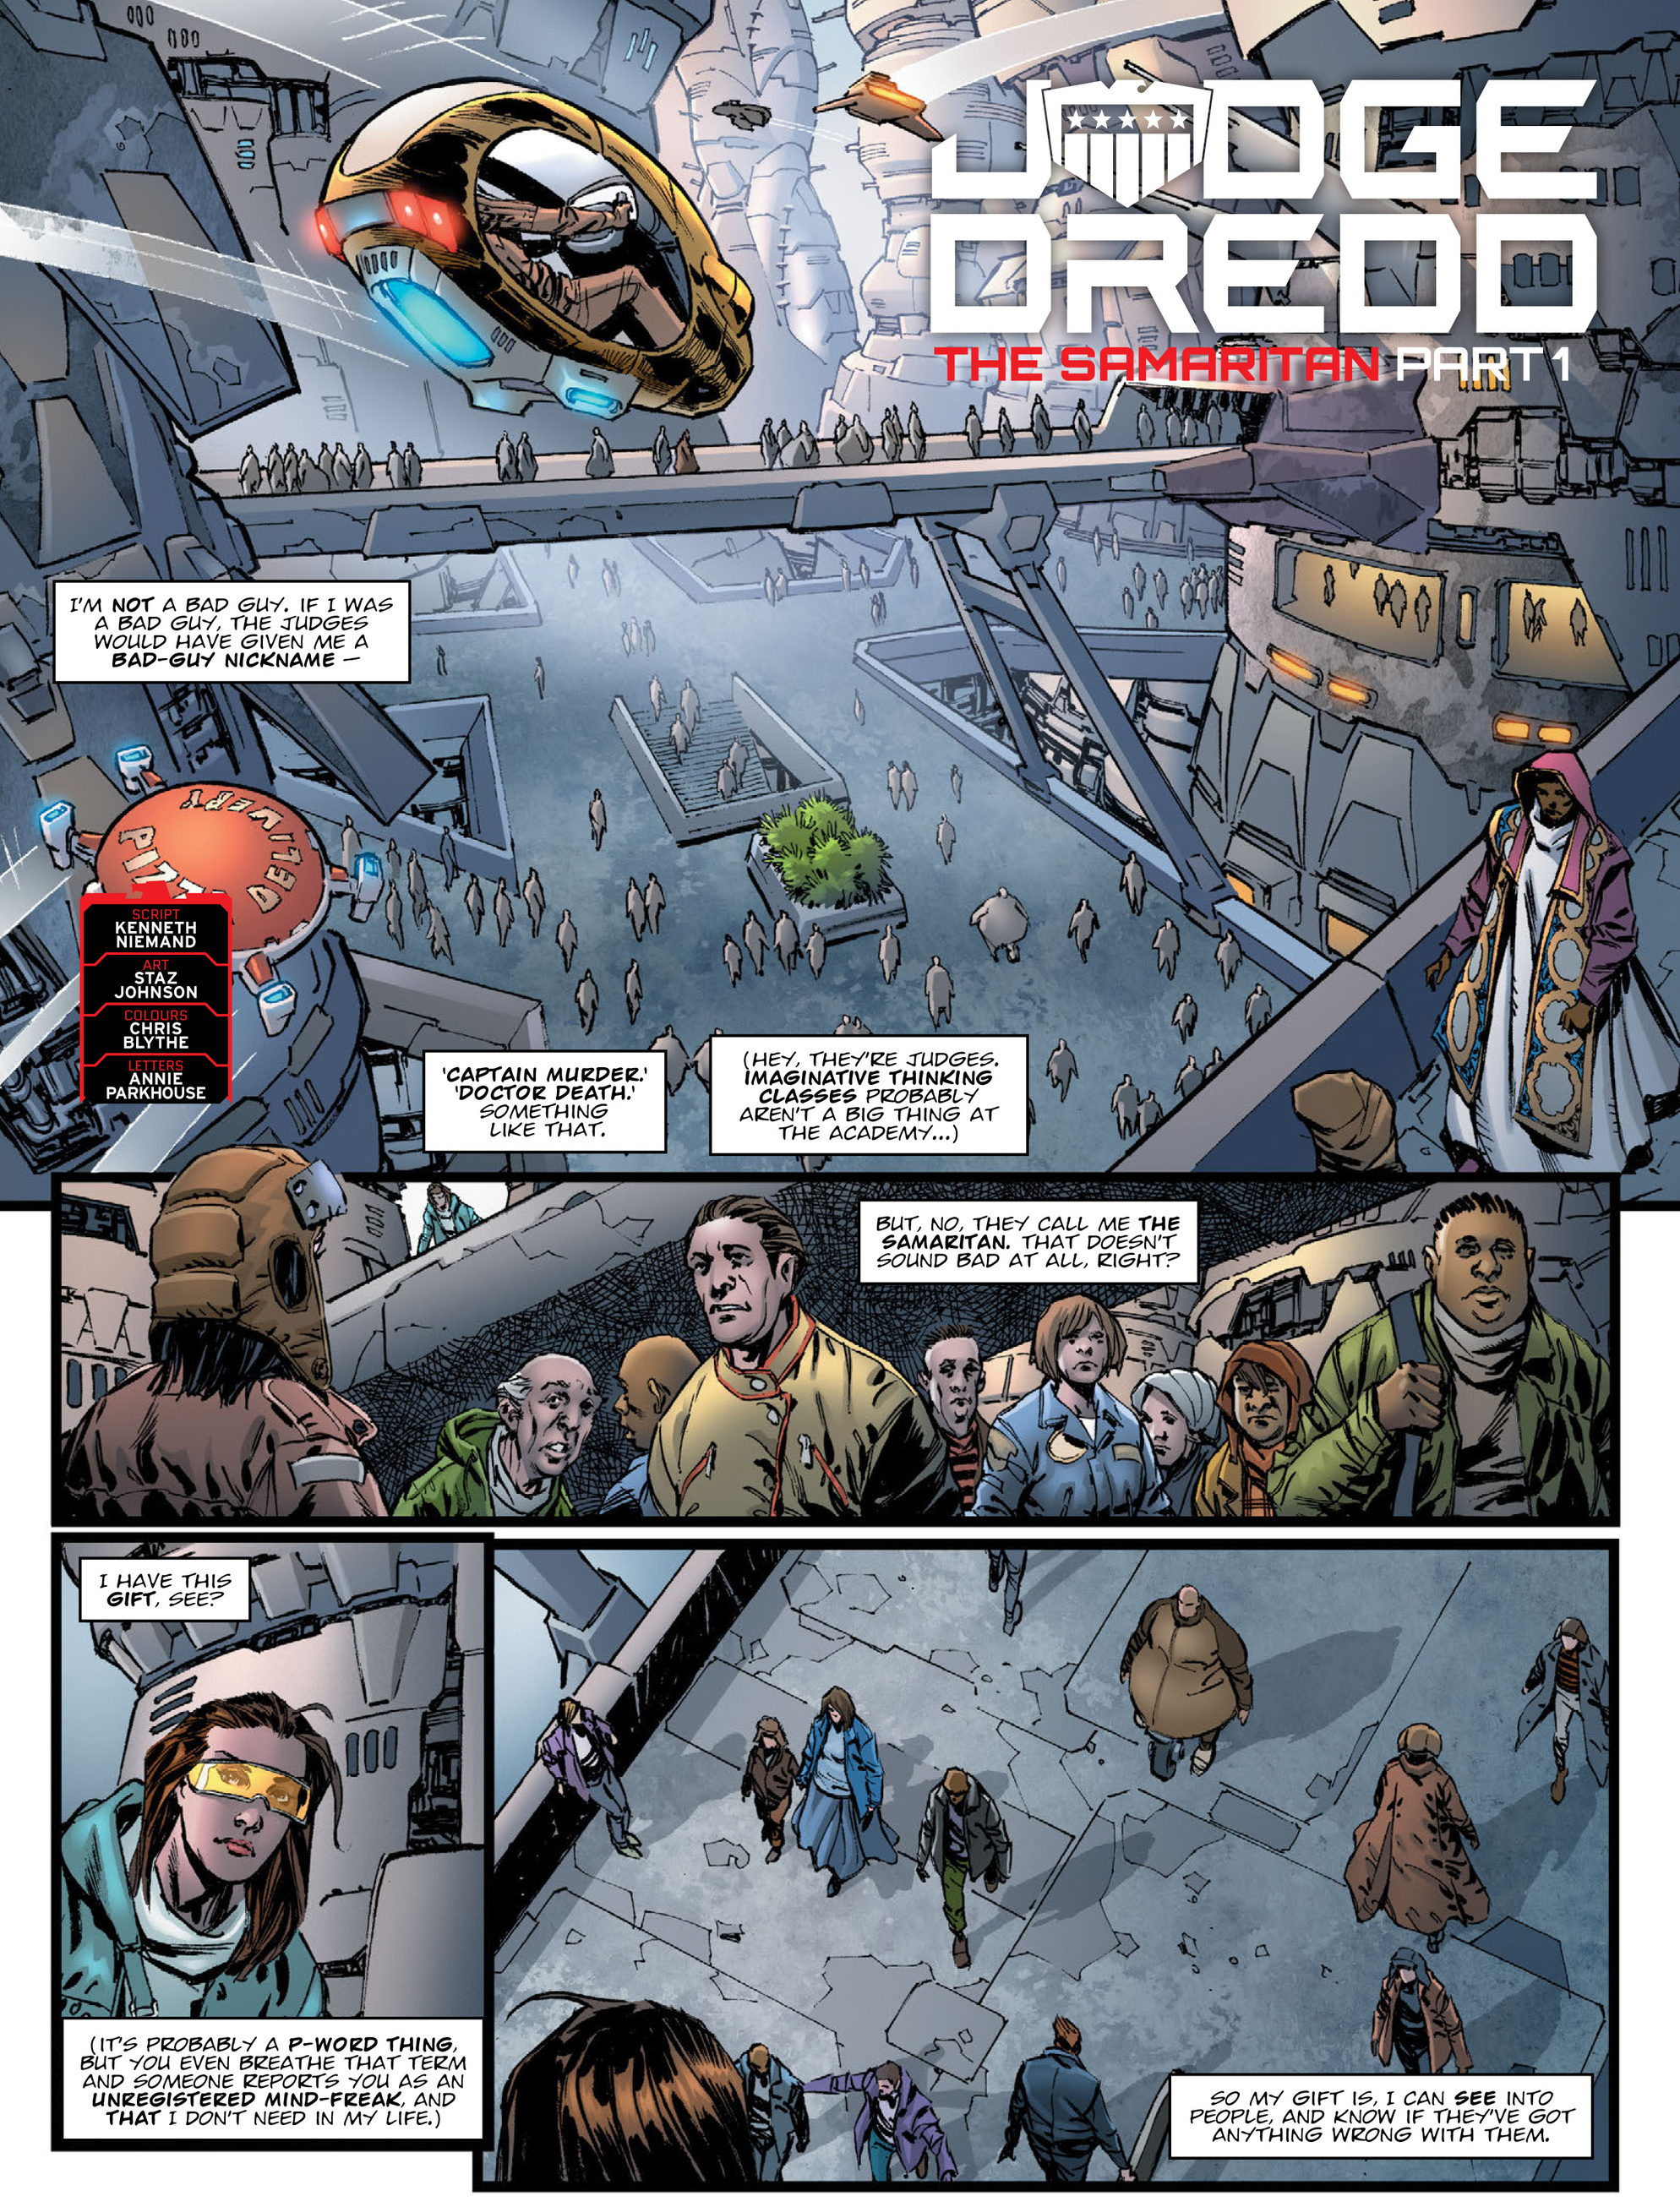 2000 AD: Chapter 2136 - Page 3